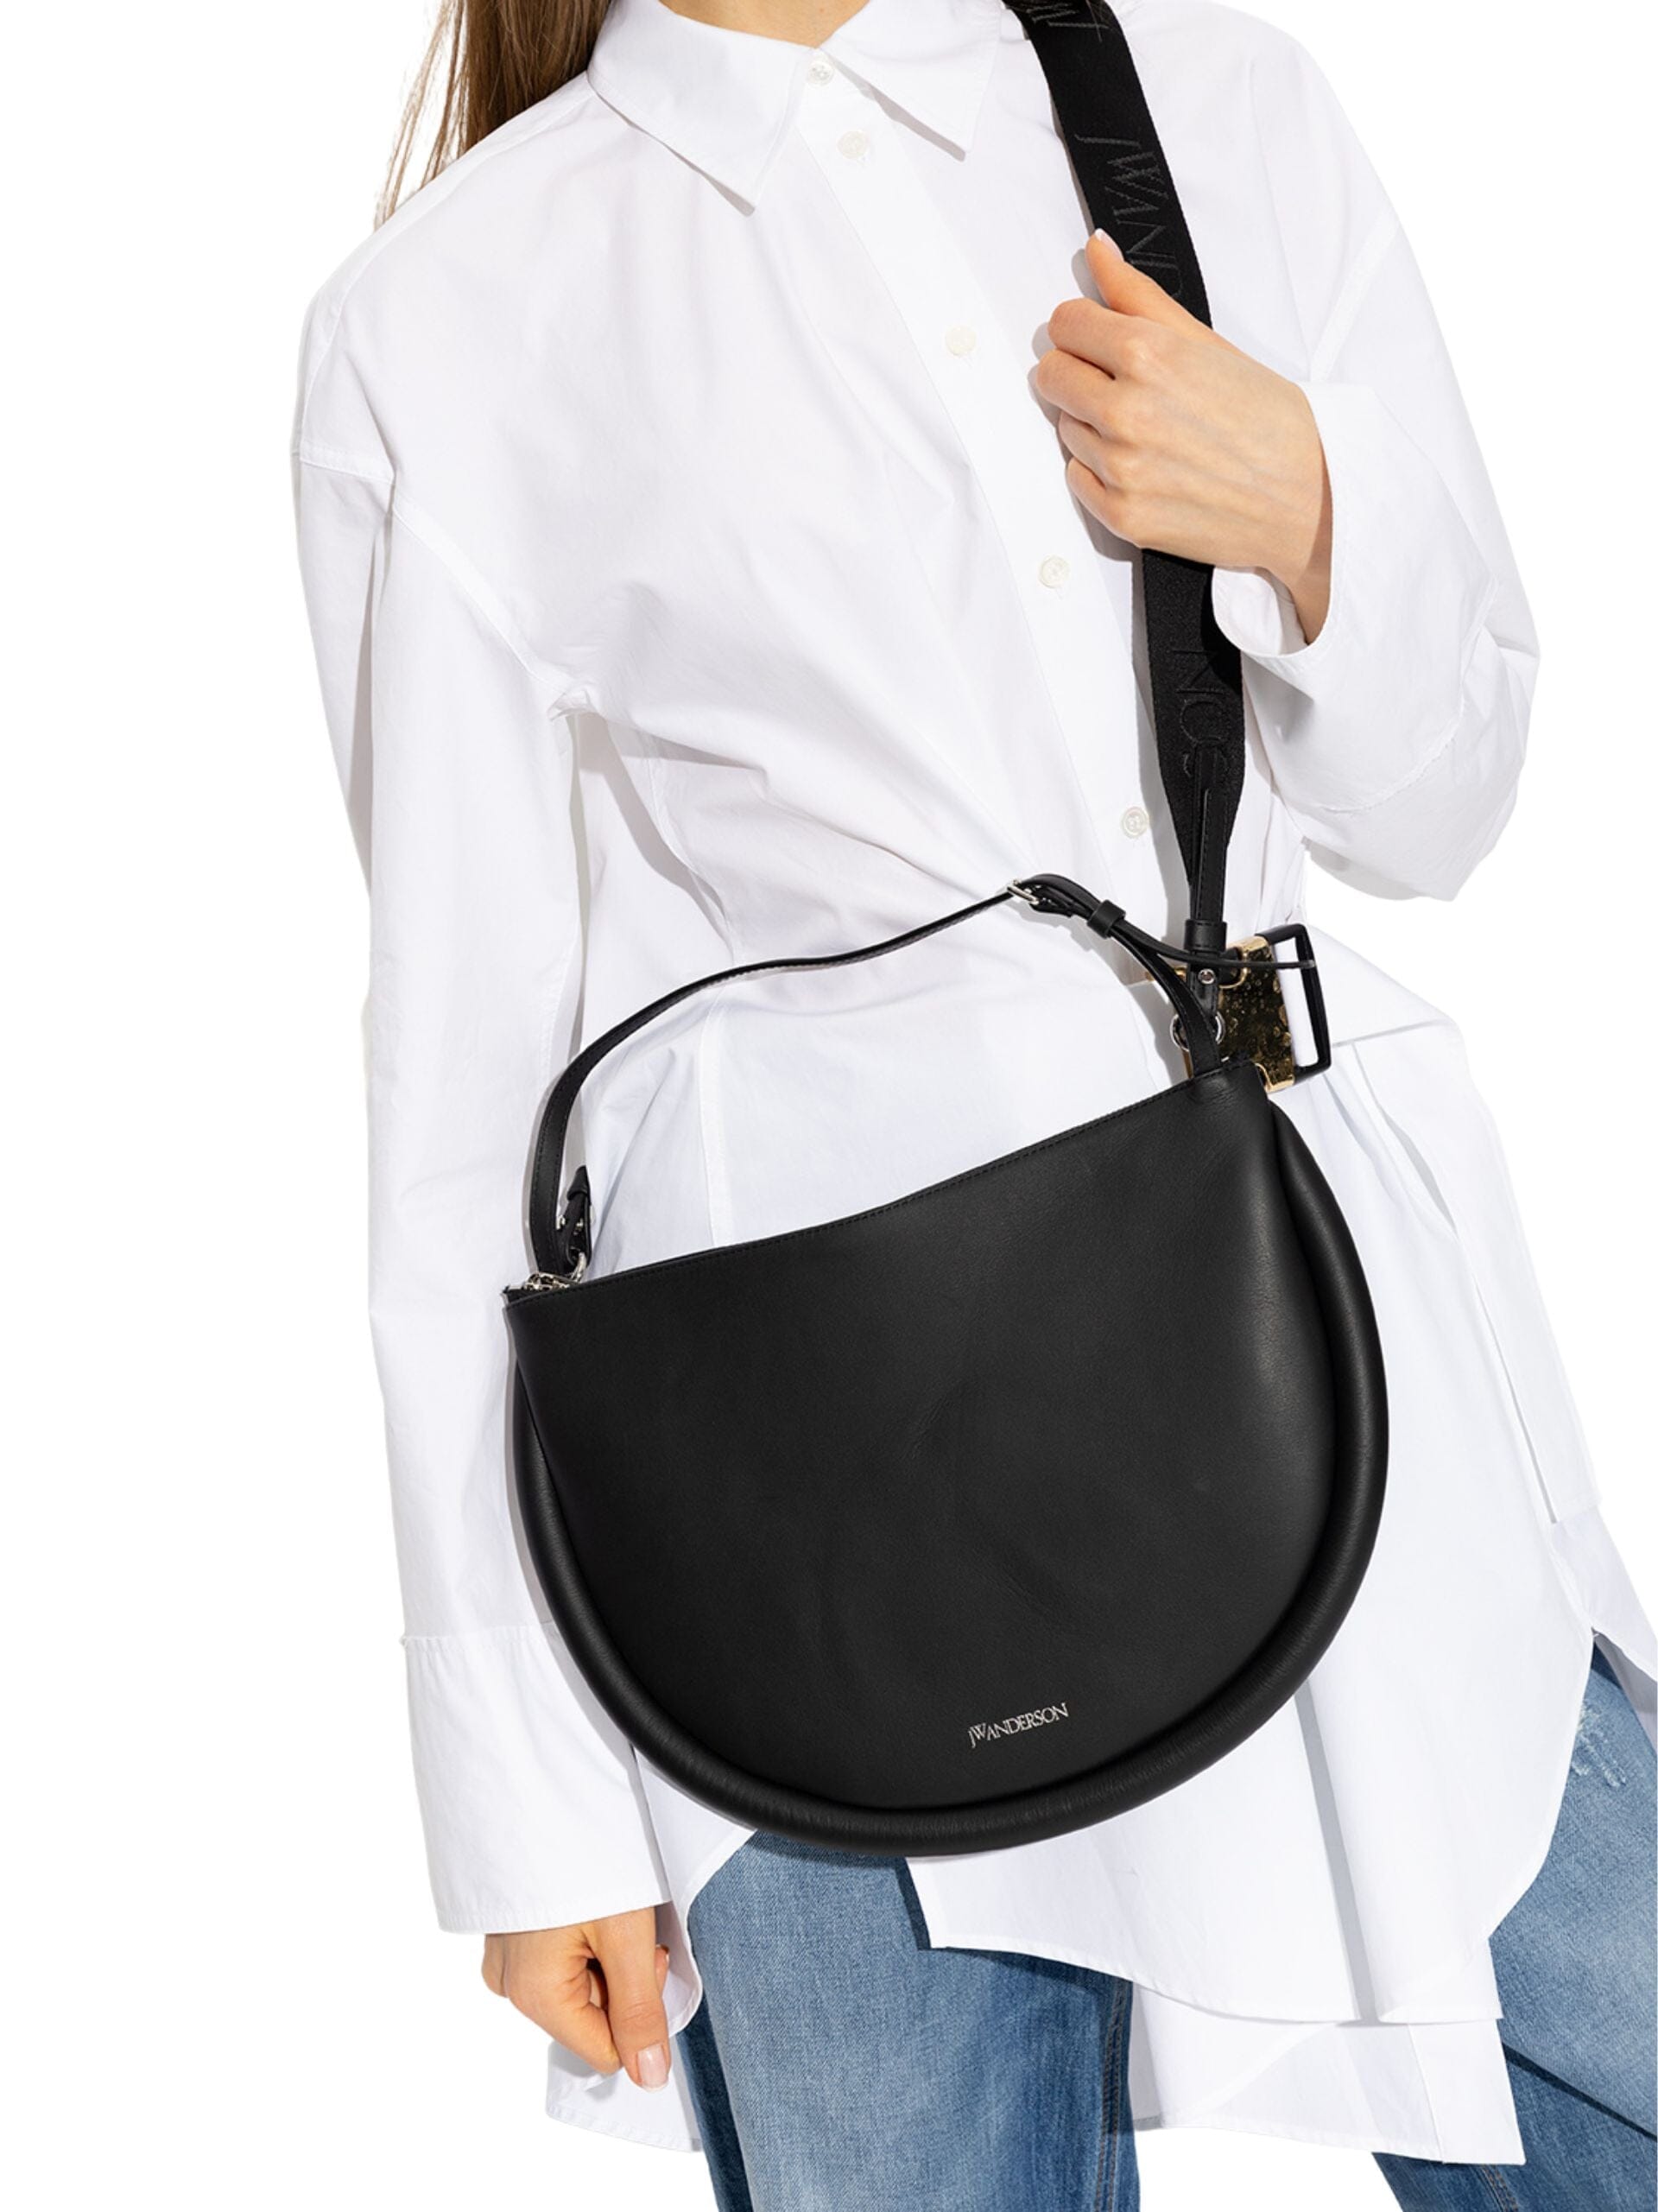 JW ANDERSON The Bumper-Moon two-tone leather shoulder bag